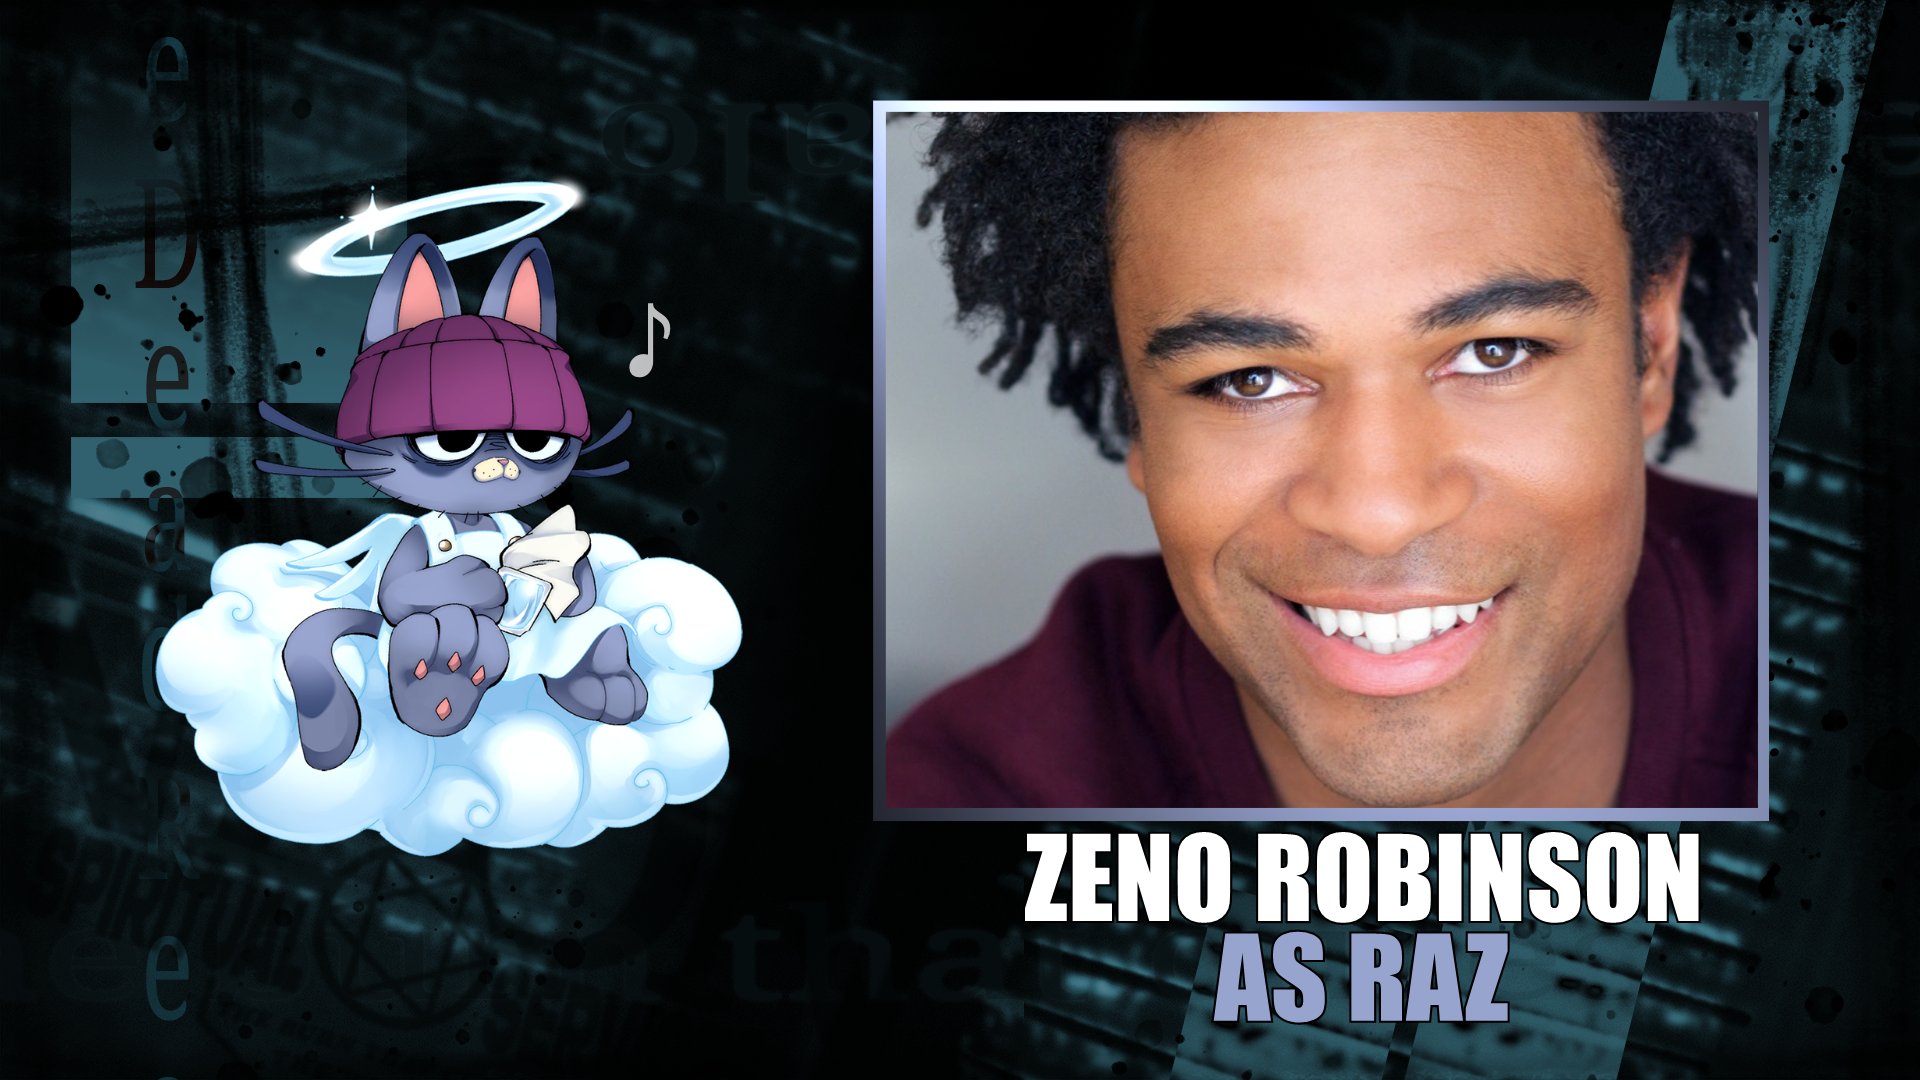 OG Collectibles is happy to announce we will be having Zeno Robinson o